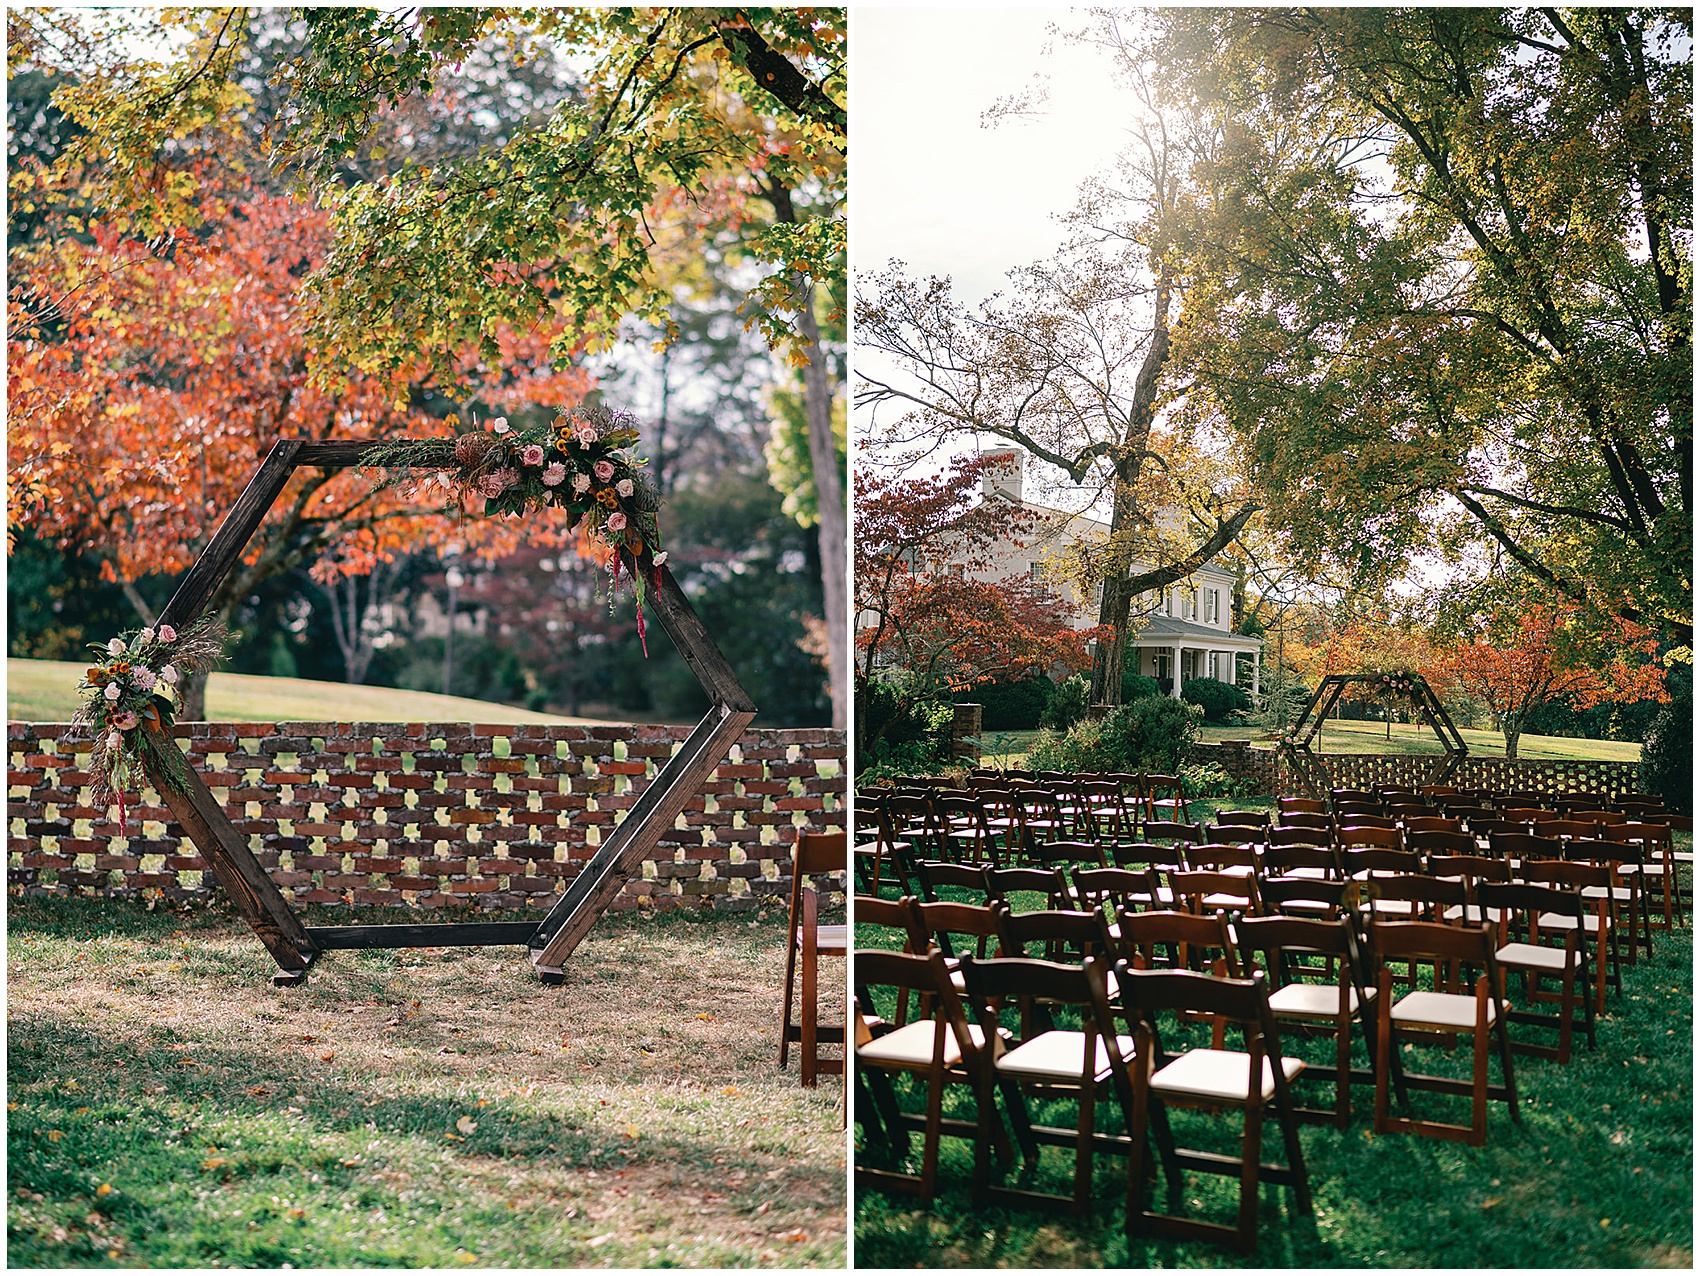 Details of a wedding ceremony set up with a wooden arbos and chairs along a brick wall in a garden